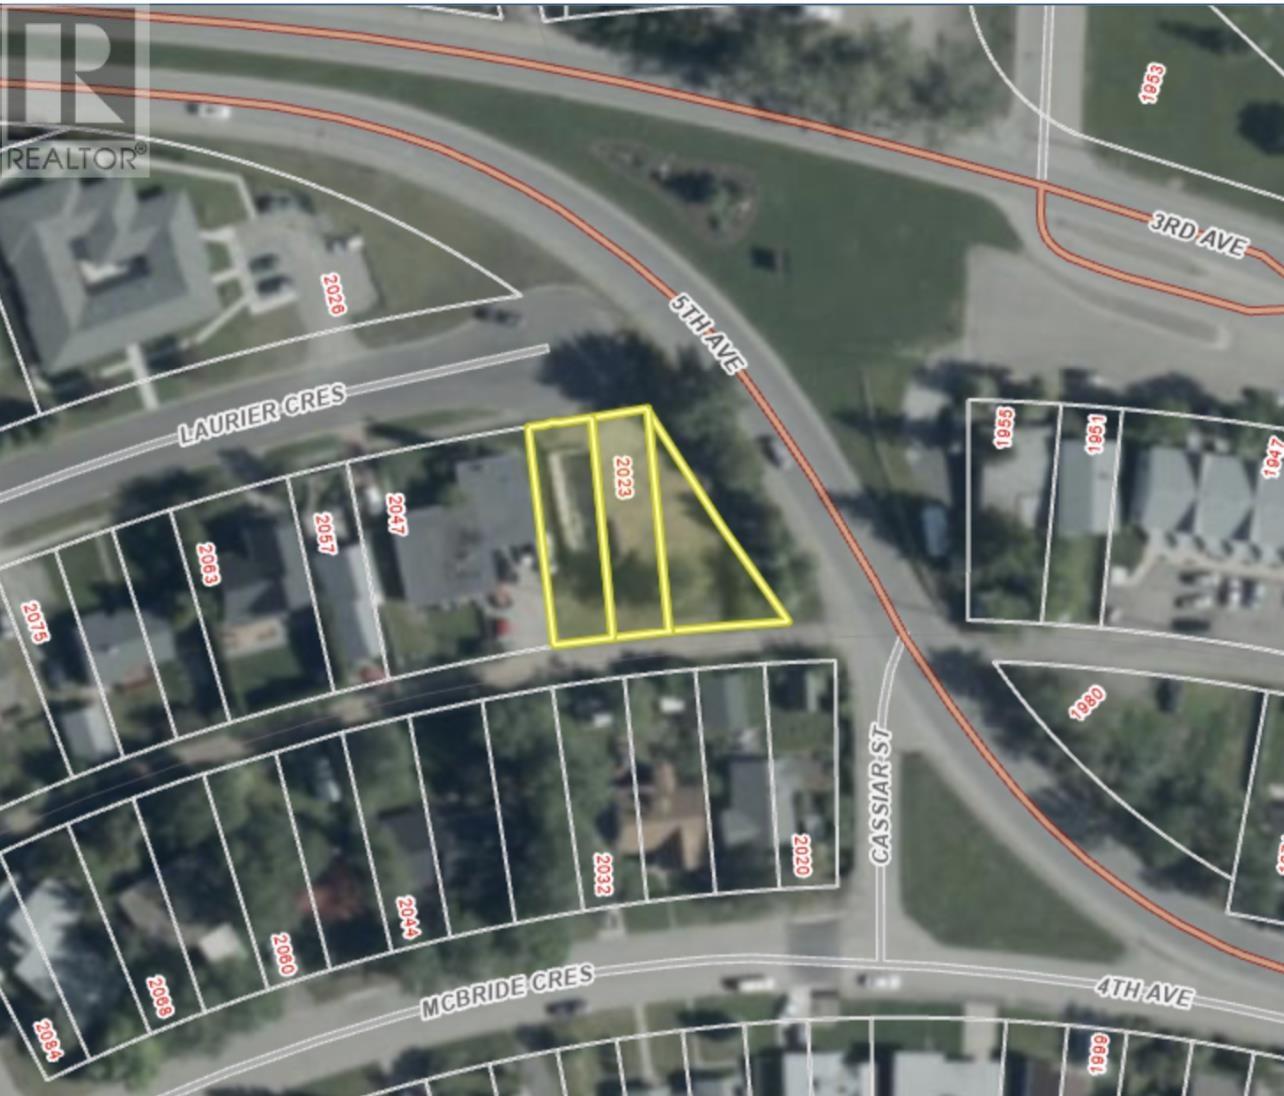 Vacant Land For Sale | 2023 Laurier Crescent | Prince George | V2M2A3